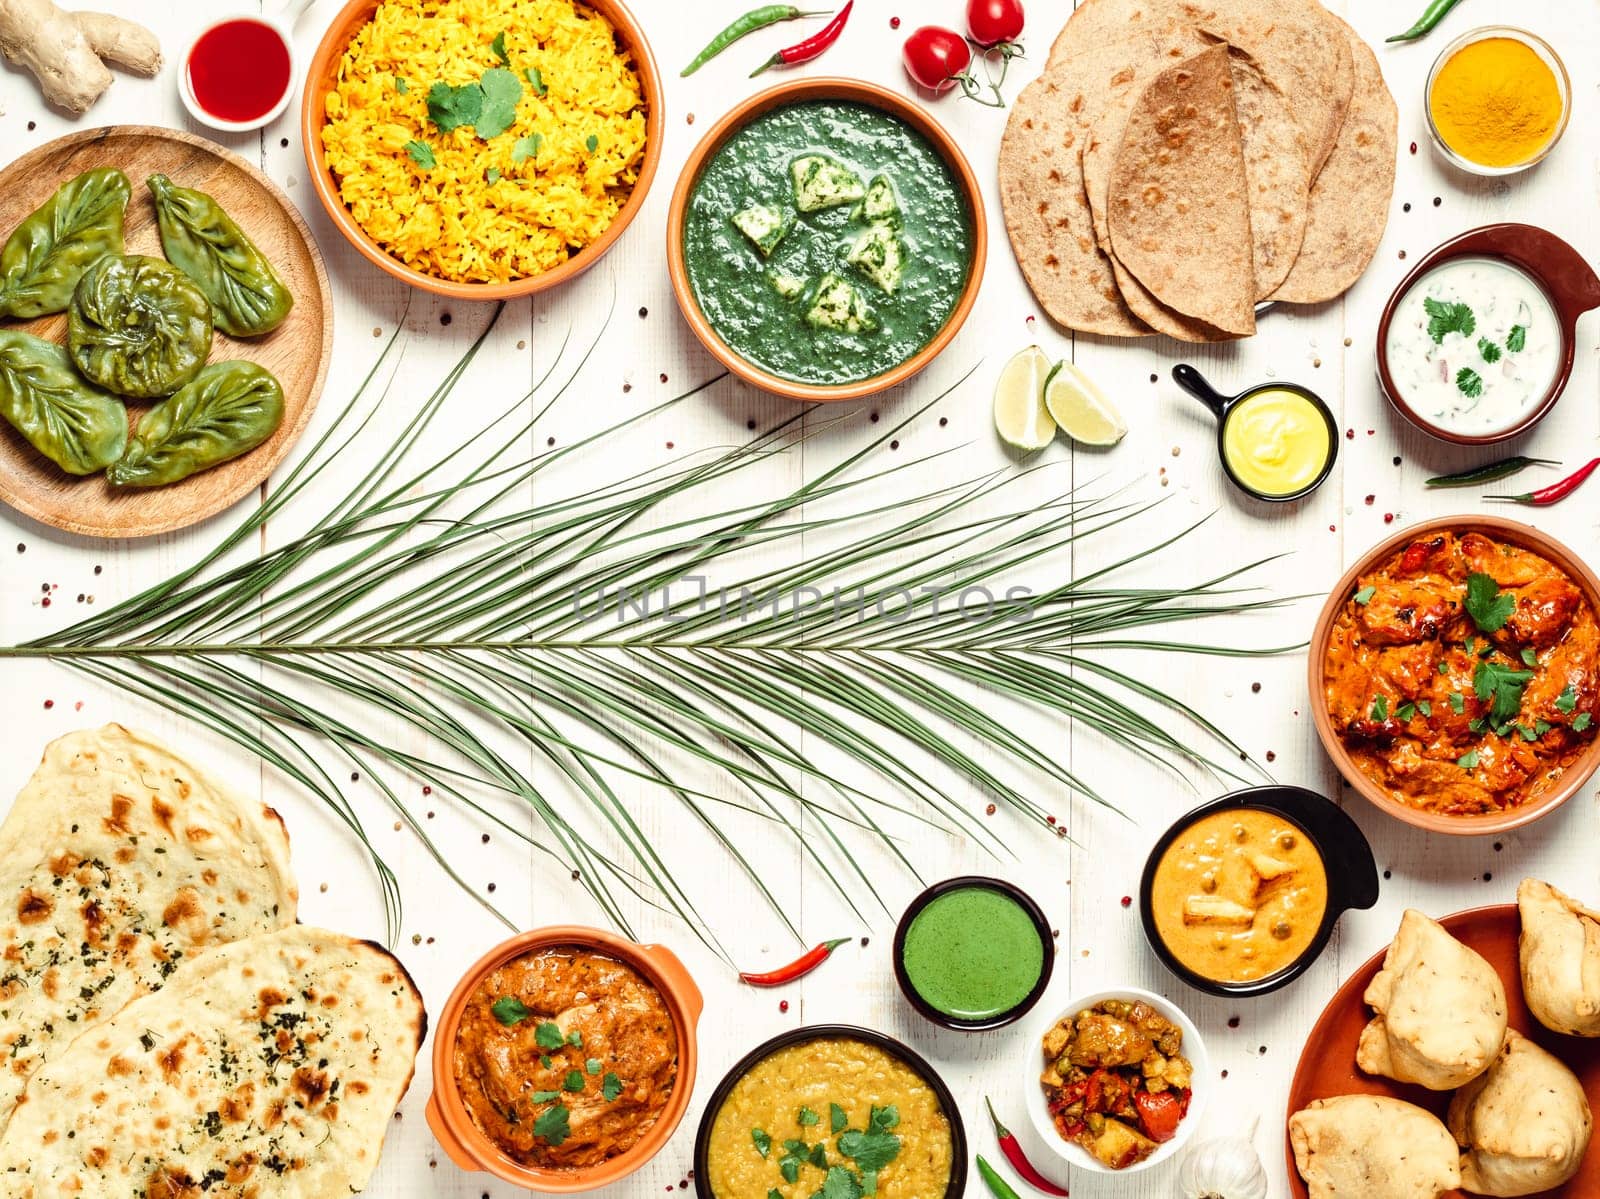 Indian cuisine dishes: tikka masala, dal, paneer, samosa, chapati, chutney, spices. Indian food on white wooden background. Assortment indian meal with copy space for text. Top view or flat lay.